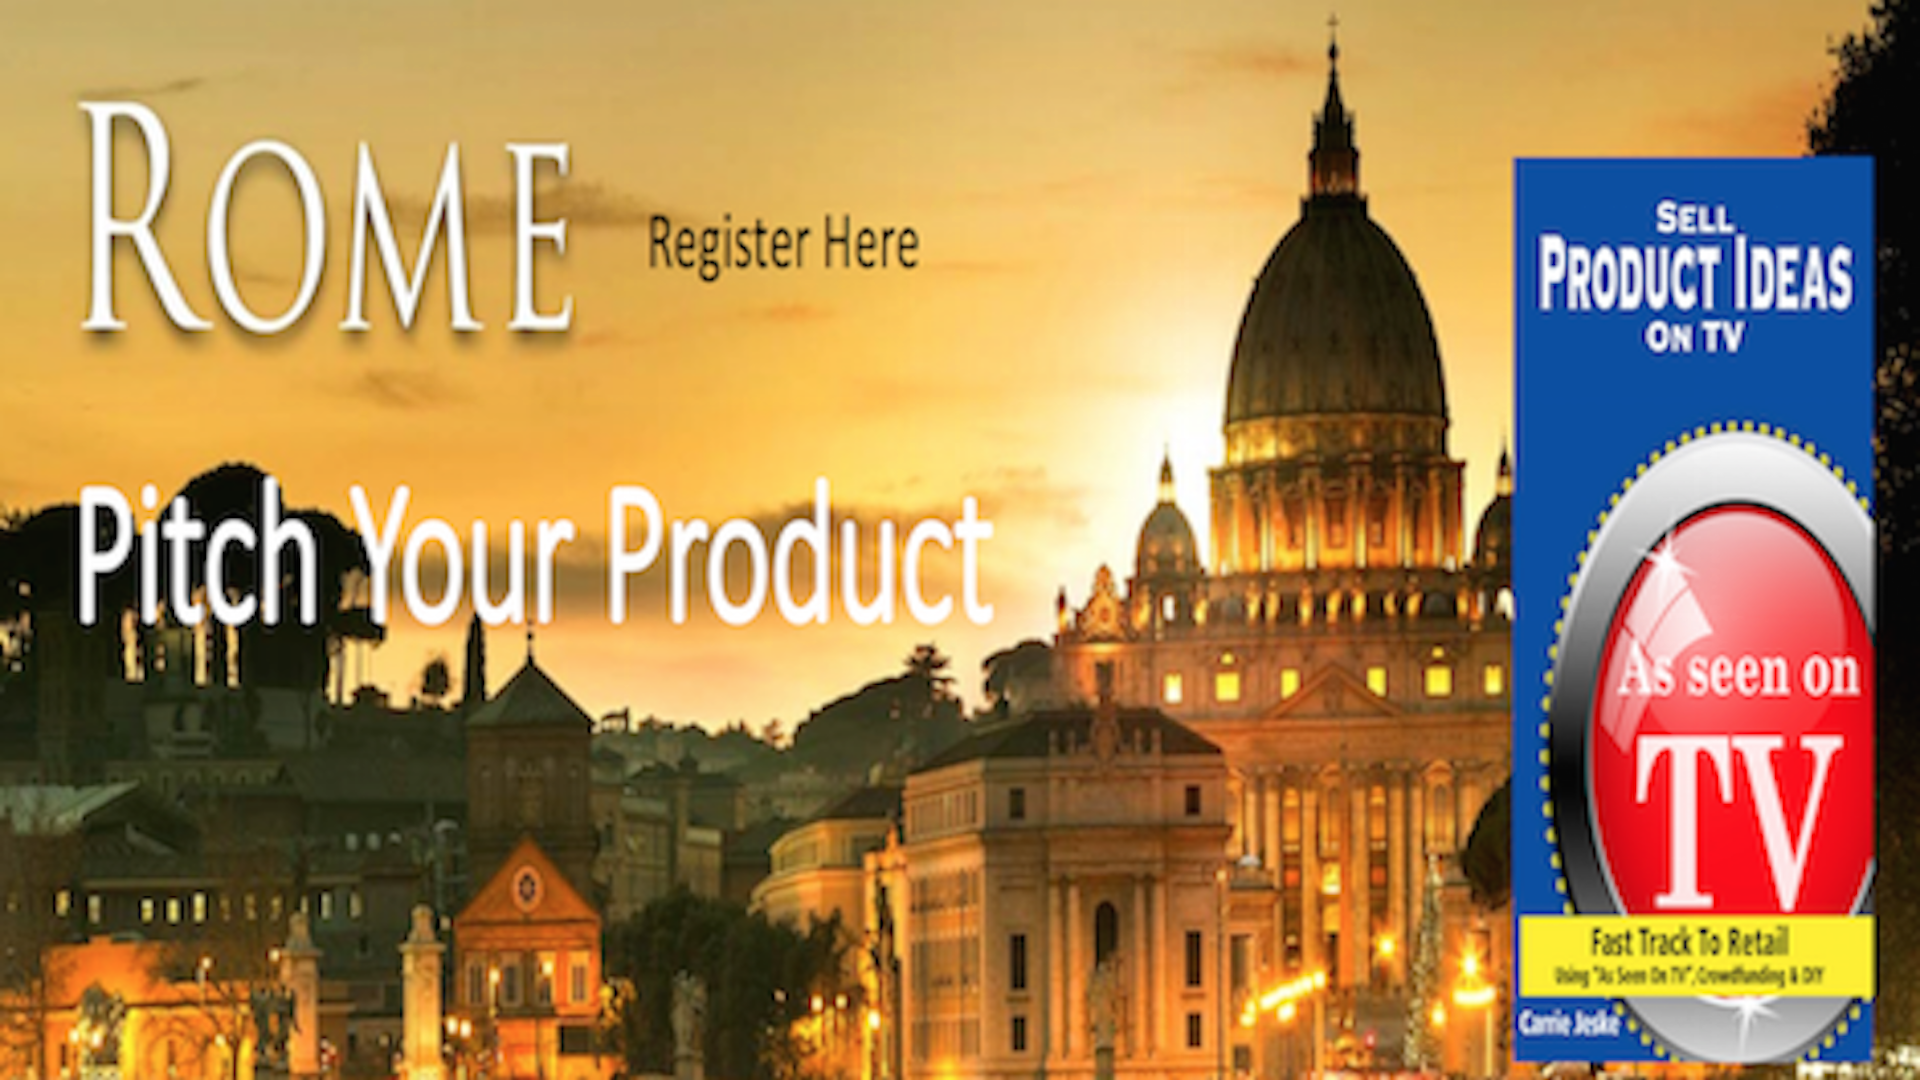 Rome Italy Pitch Your Product to Carrie Jeske